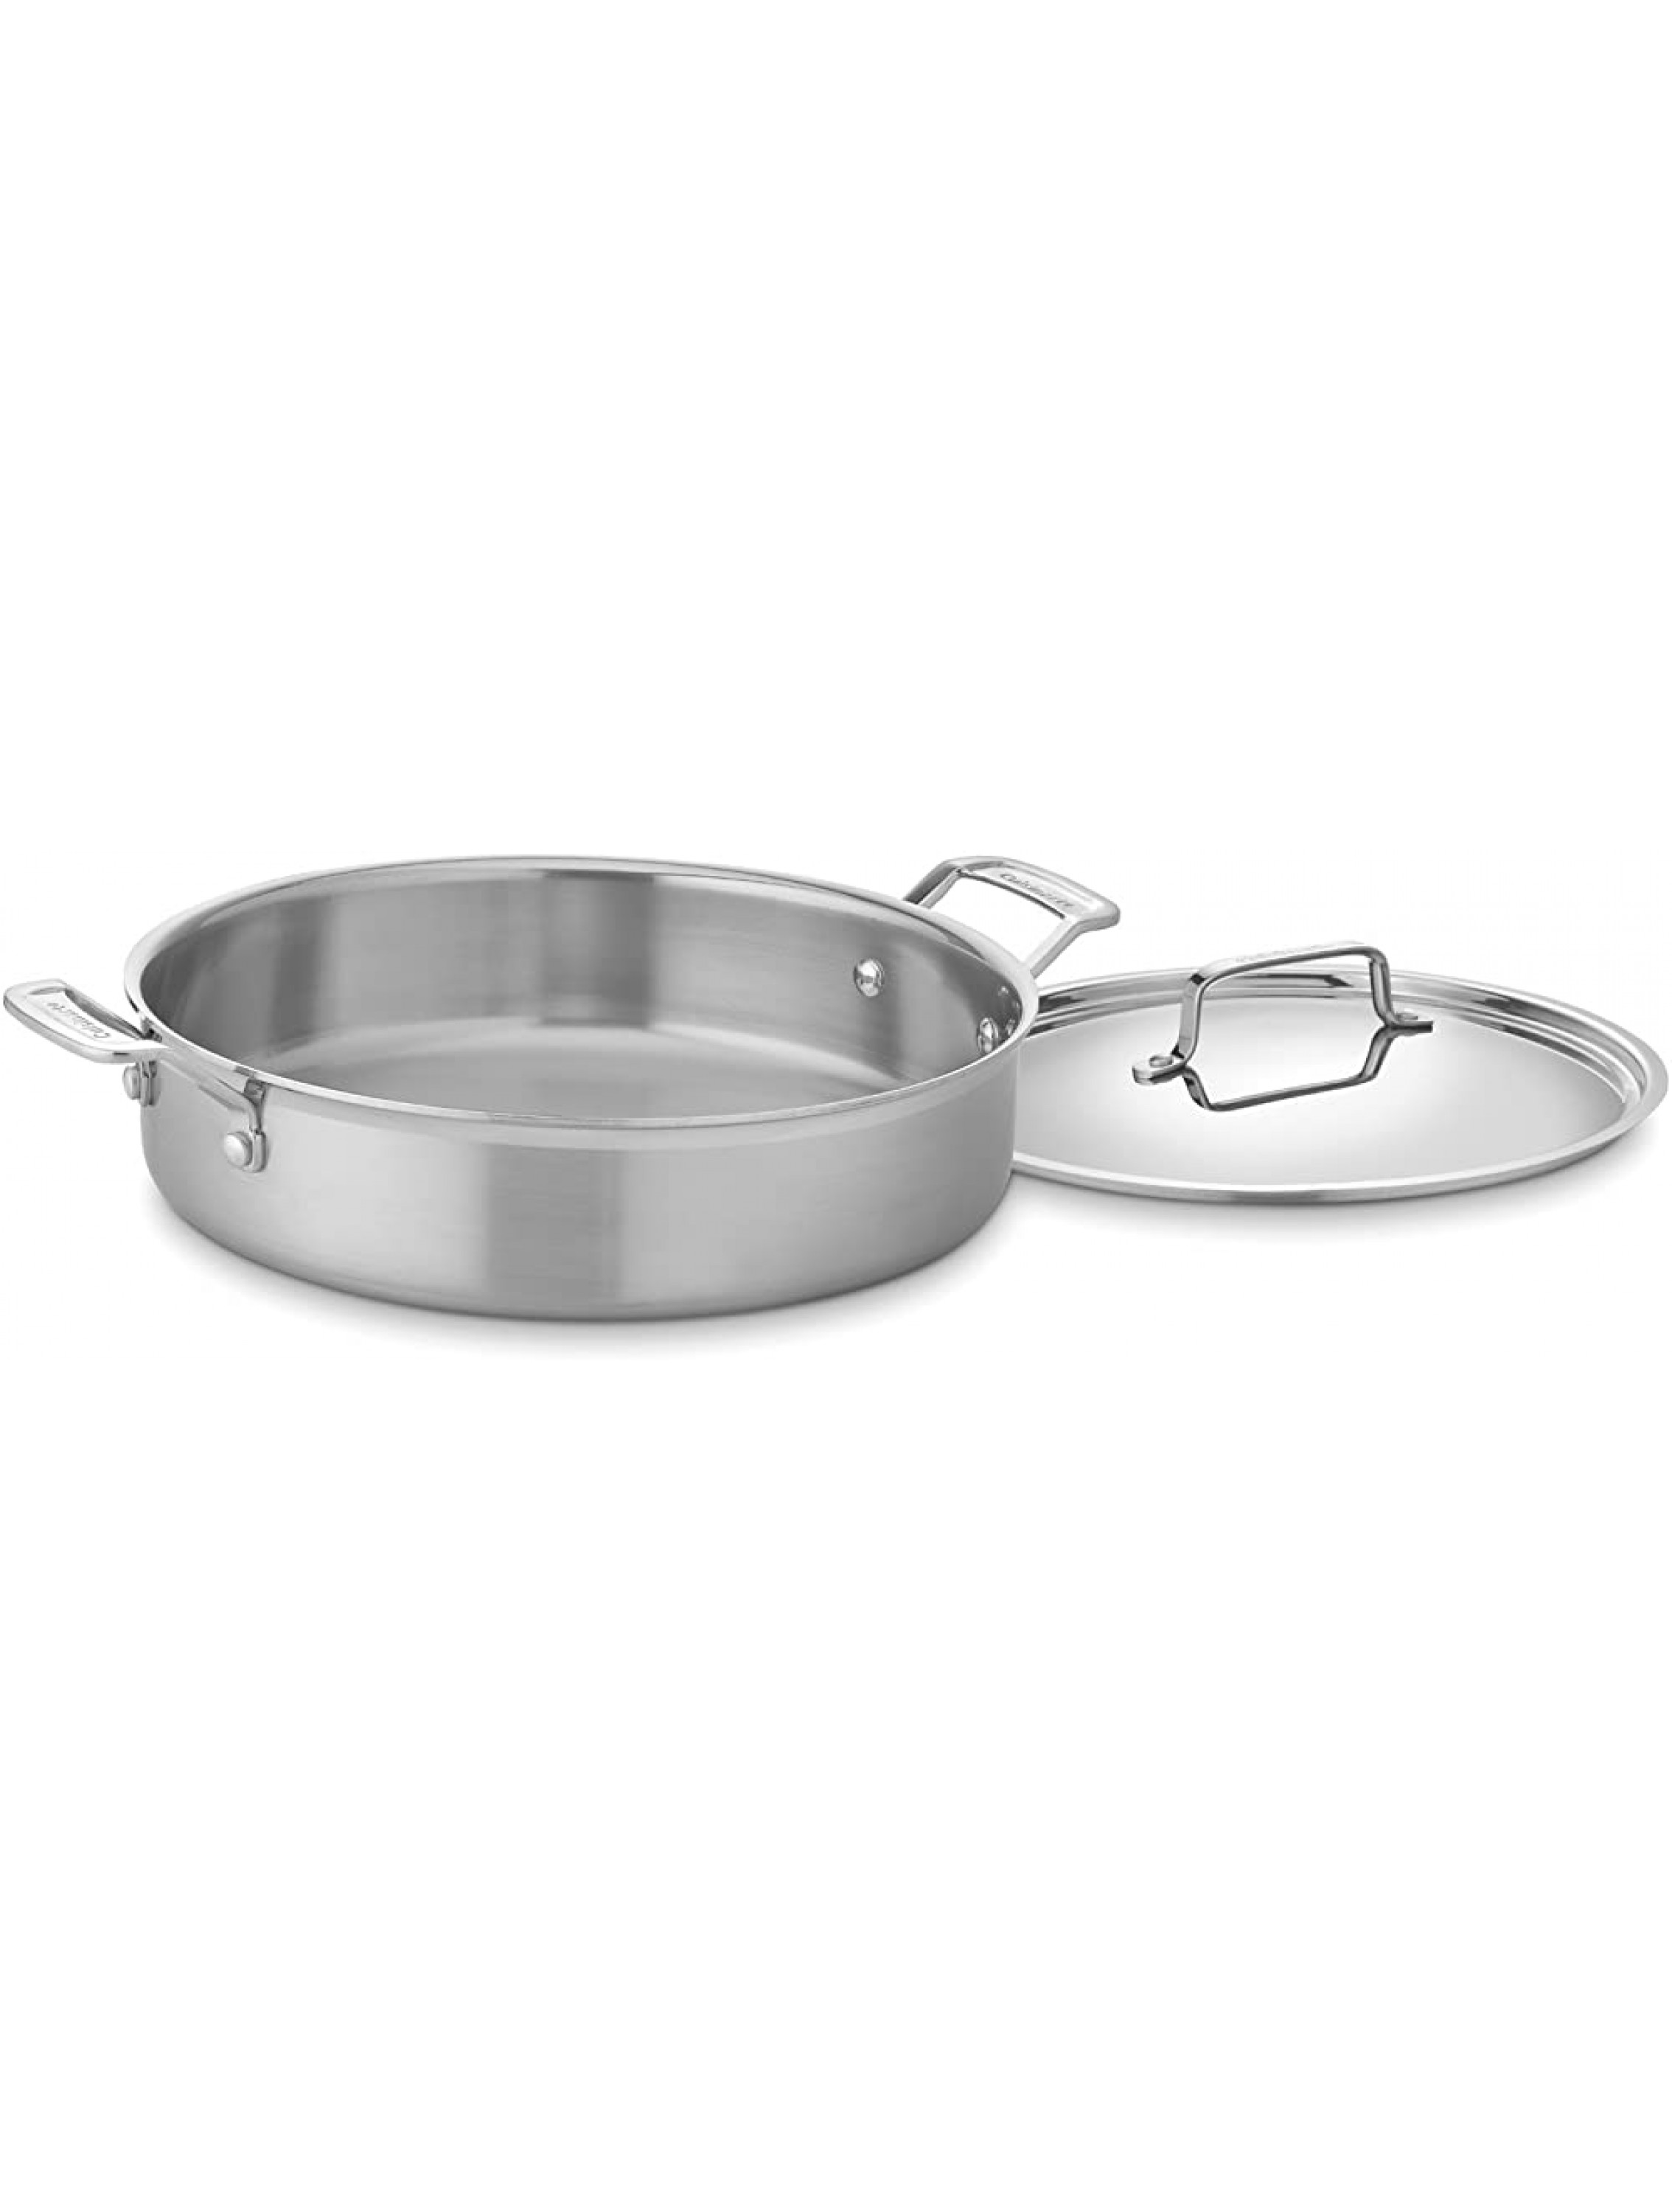 Cuisinart MultiClad Pro Stainless 5-1 2-Quart Casserole with Cover - BD49RPH3G